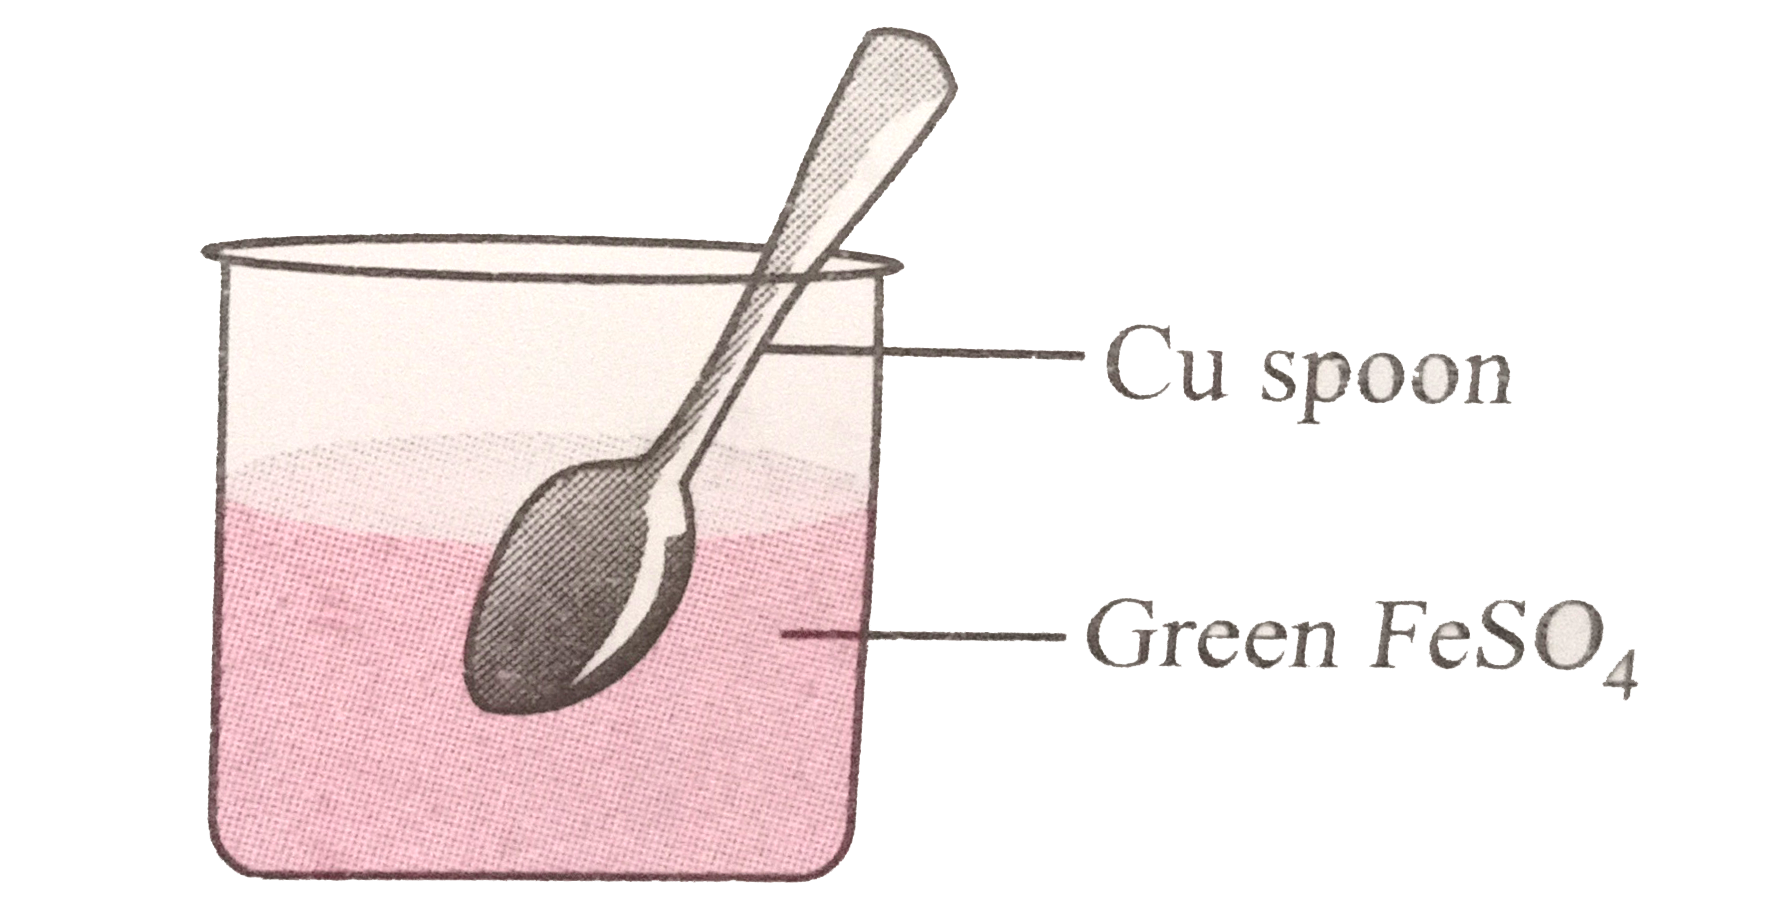 If a spoon of copper metal is placed in a solution of FeSO(4), what will be the correct observation ?   

(A)Copper is dissolved in 
F
e
S
O
4
 to give brown deposit.

(B)No reaction takes place.

(C)Iron is deposited on copper spoon.

(D)Both copper and iron are precipitated